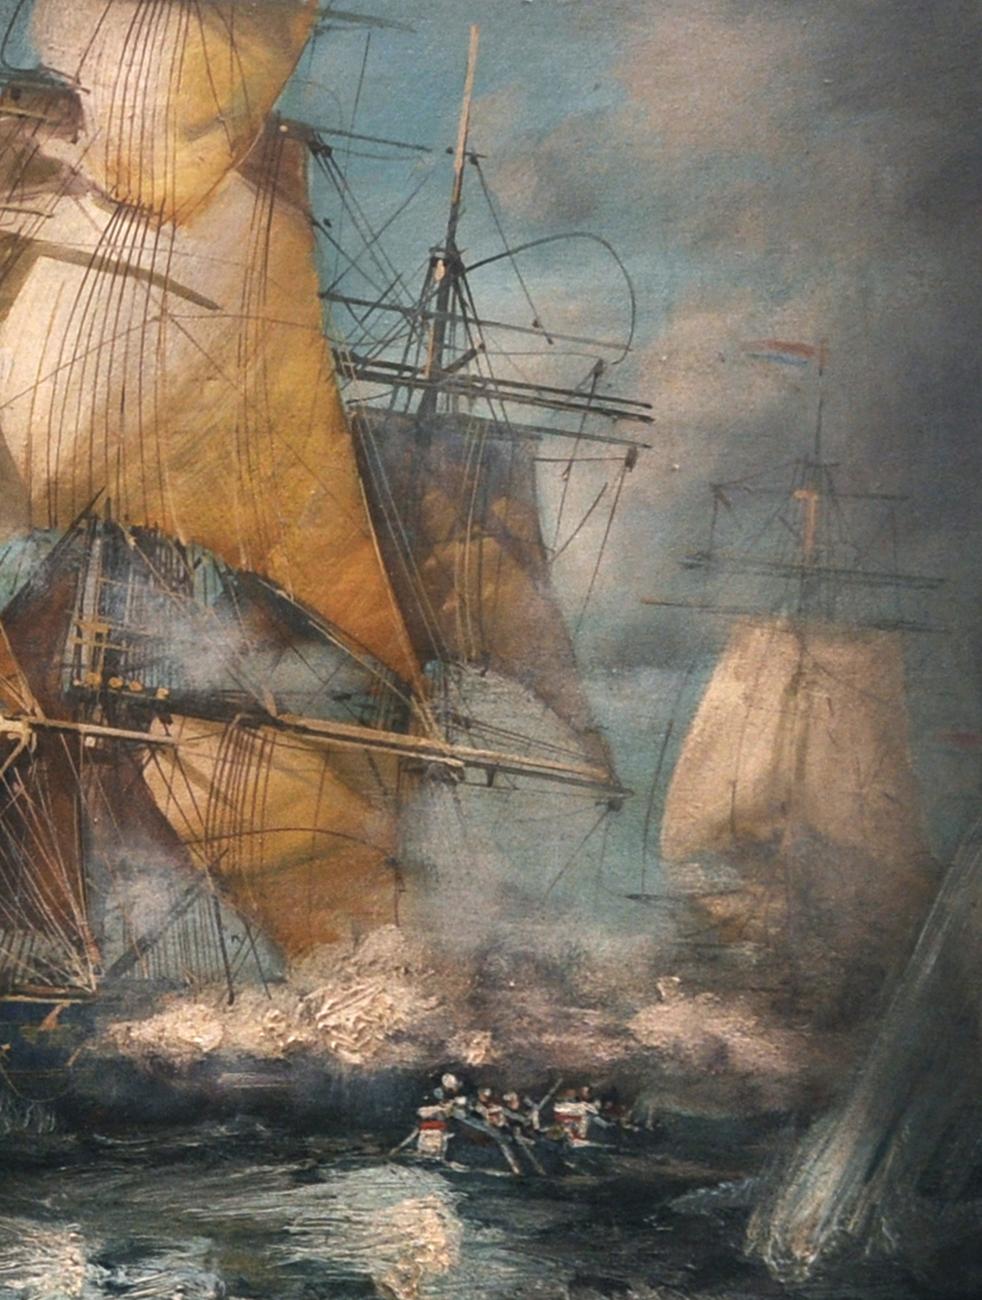 Battleship - John Stevens Italia 2007 - Oil on canvas cm.40x80.

In this precious oil painting Stevens is inspired by the naval battles of the English painter Derek George Montague Gardner who, after a career as a civil engineer before and after